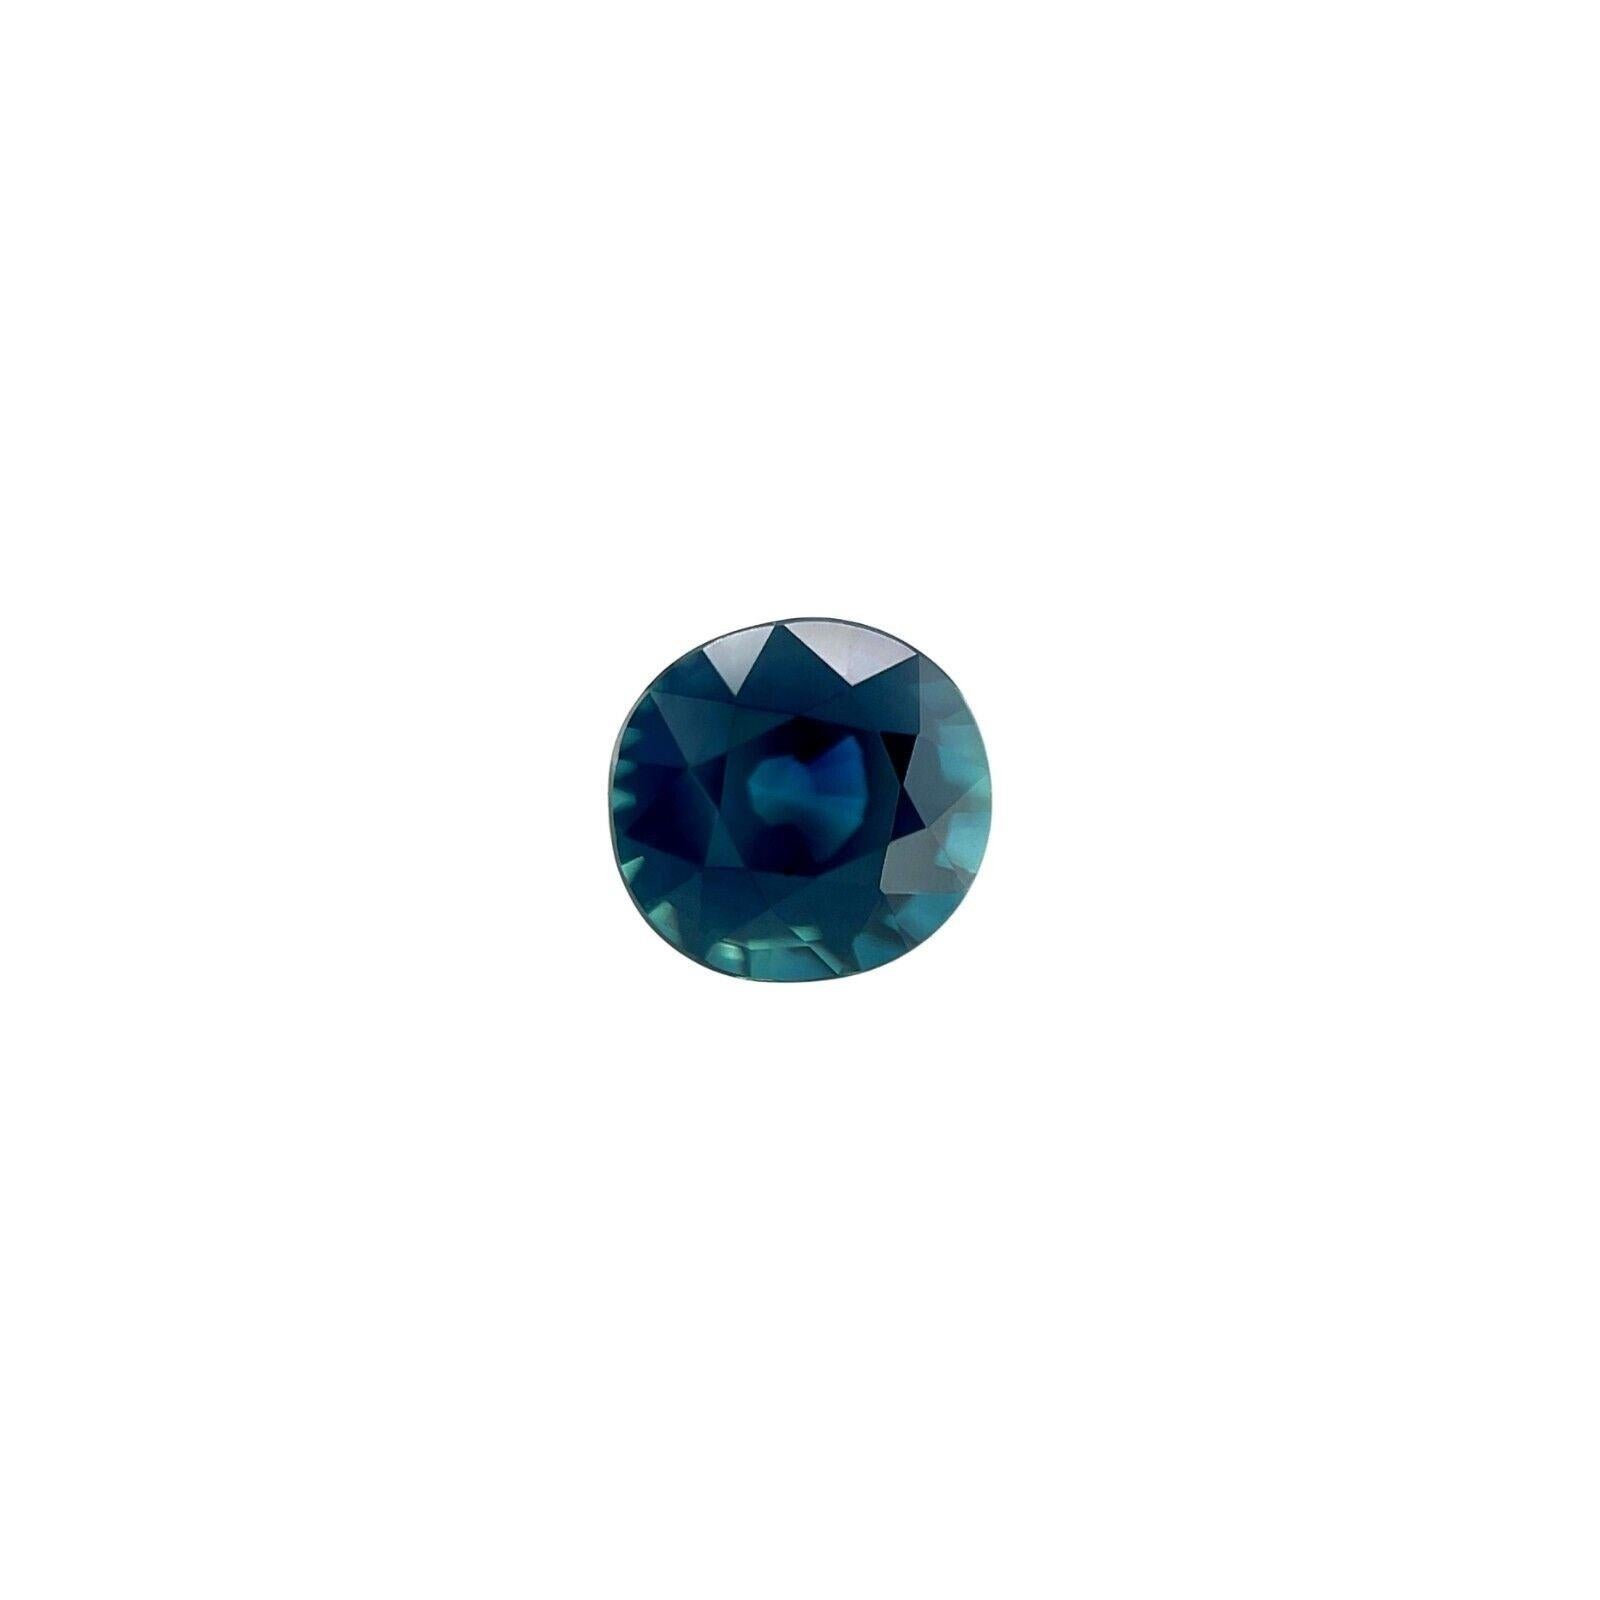 IGI Certified 1.11Ct Natural Teal Blue Sapphire Untreated Unheated Rare Gem

Natural Deep Teal Blue Untreated Sapphire Gemstone IGI Certified.
1.11 Carat stone with a beautiful deep 'teal' blue colour and a very good round mixed cut.
Also has